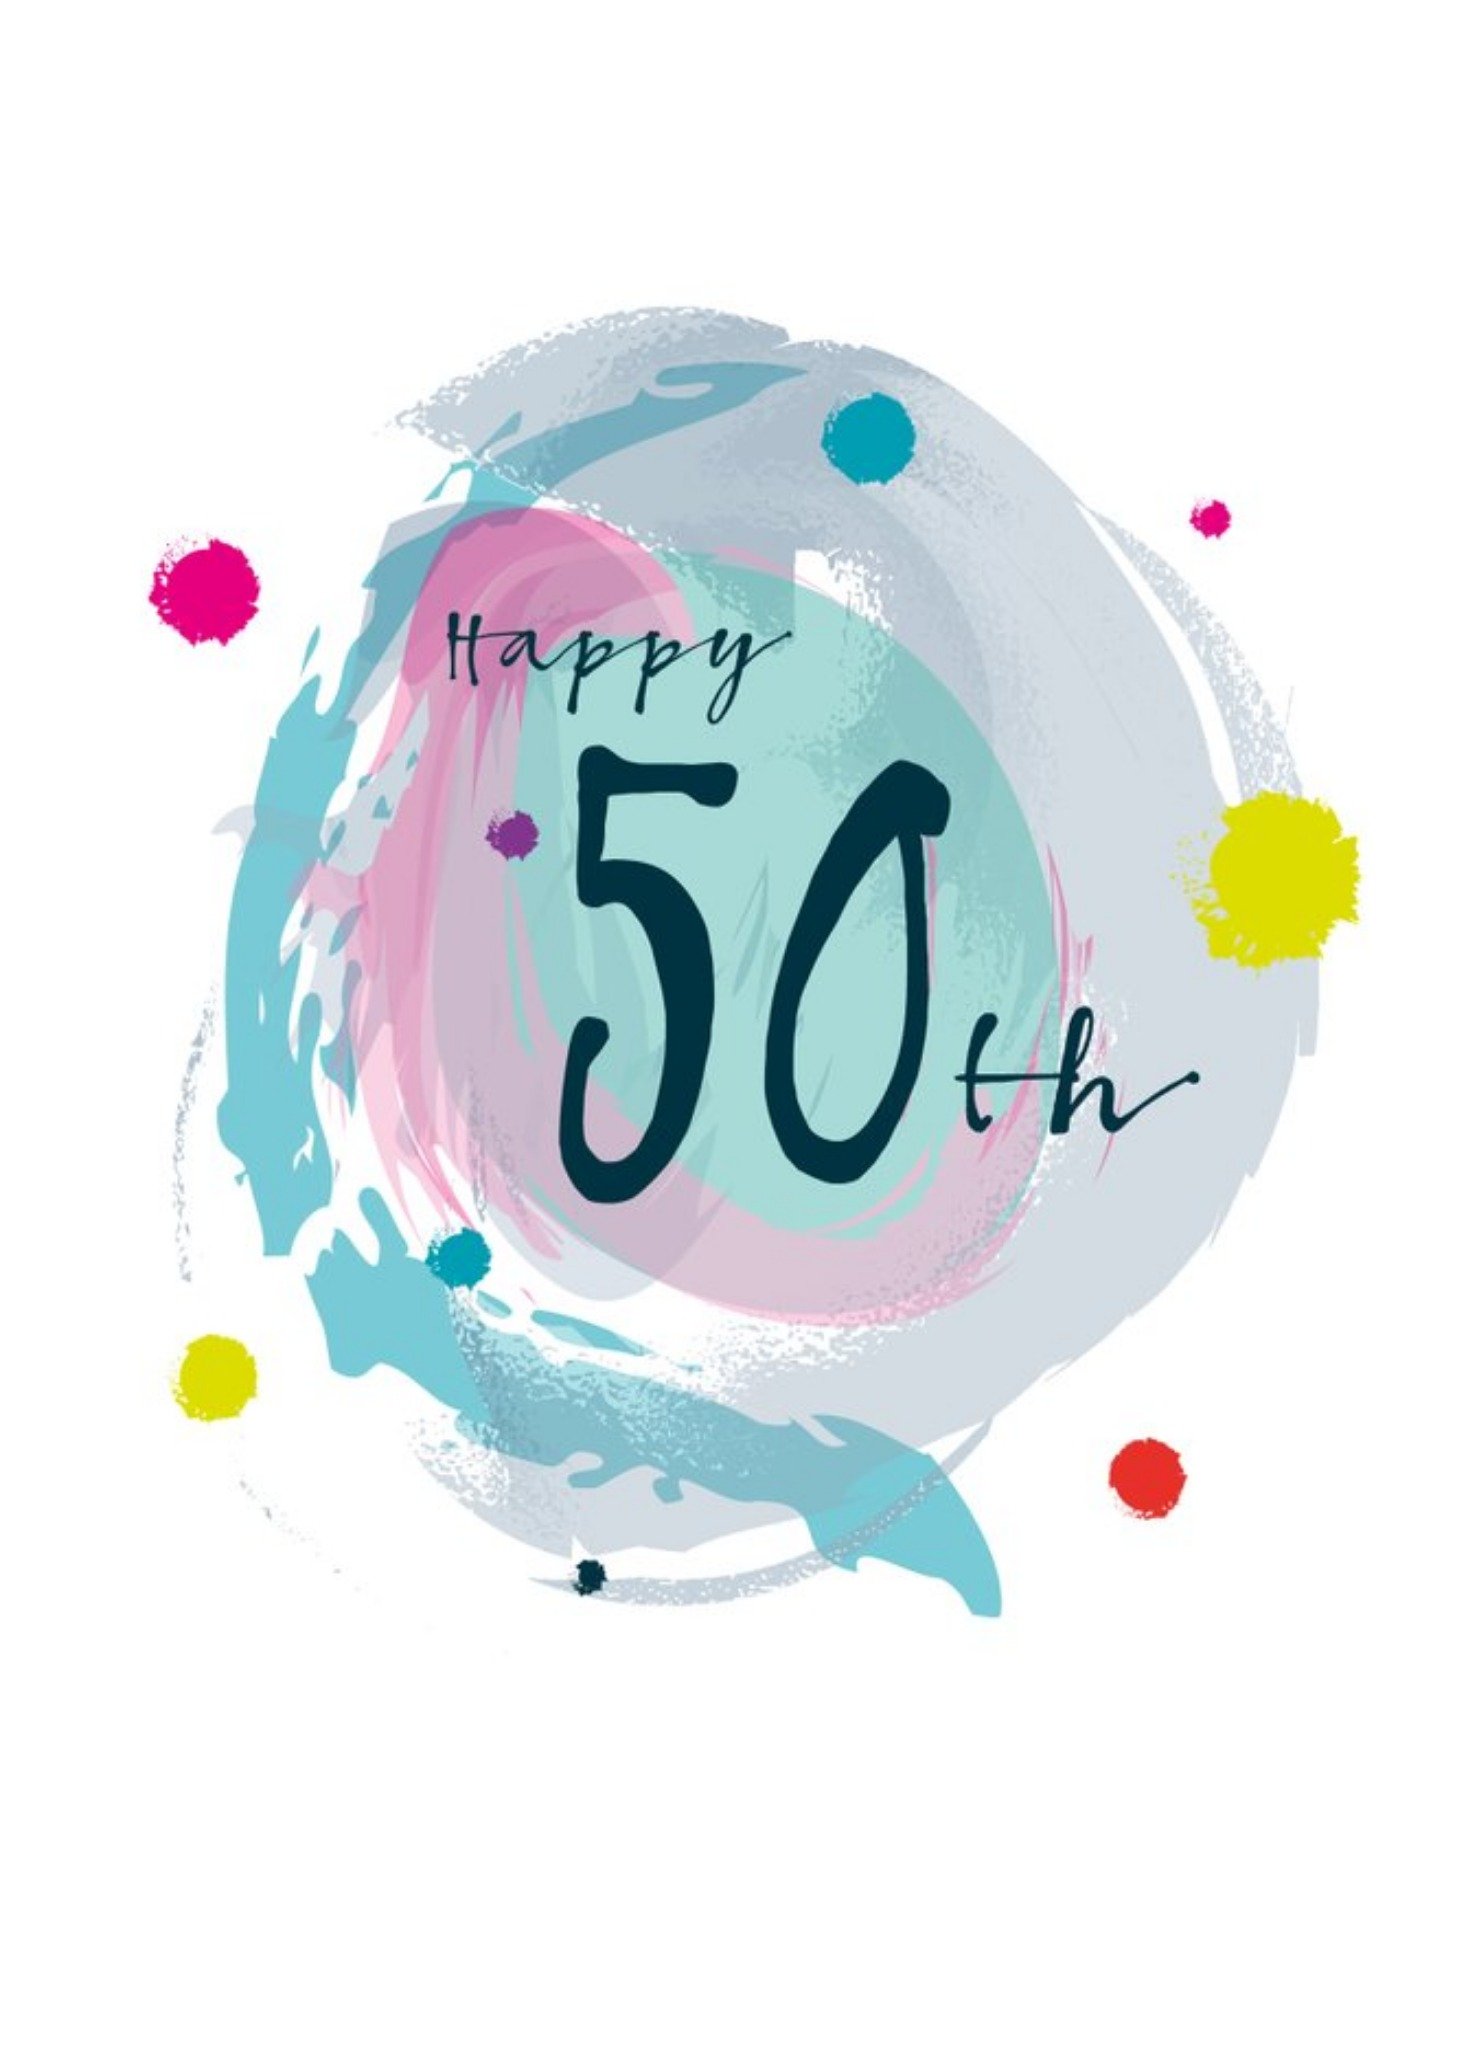 Moonpig Modern Watercolour Paint Effect Happy 50th Birthday Card, Large